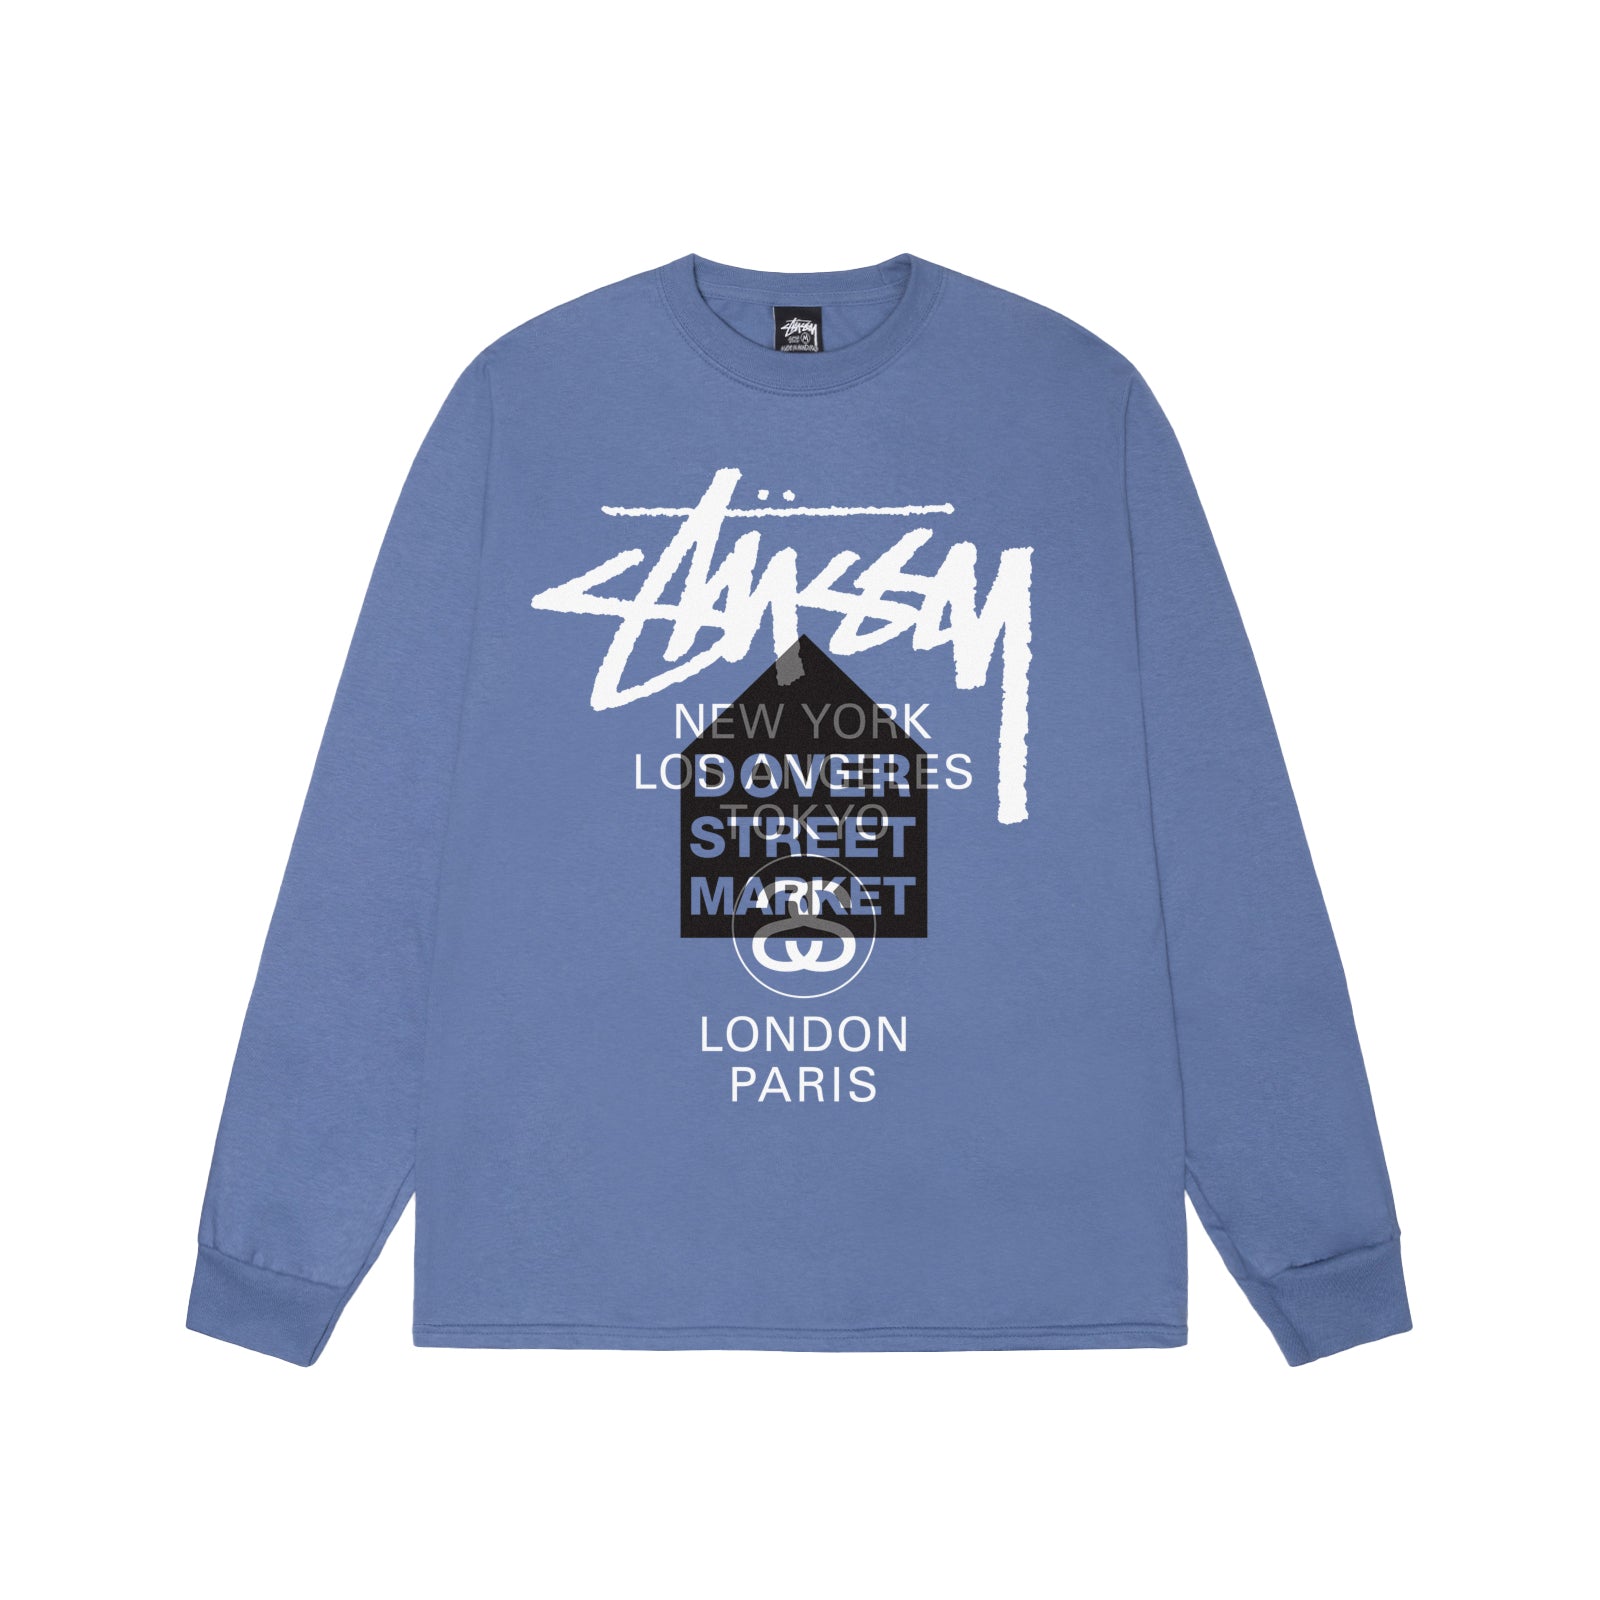 stussy WORLD TOUR LS TEE limited edition